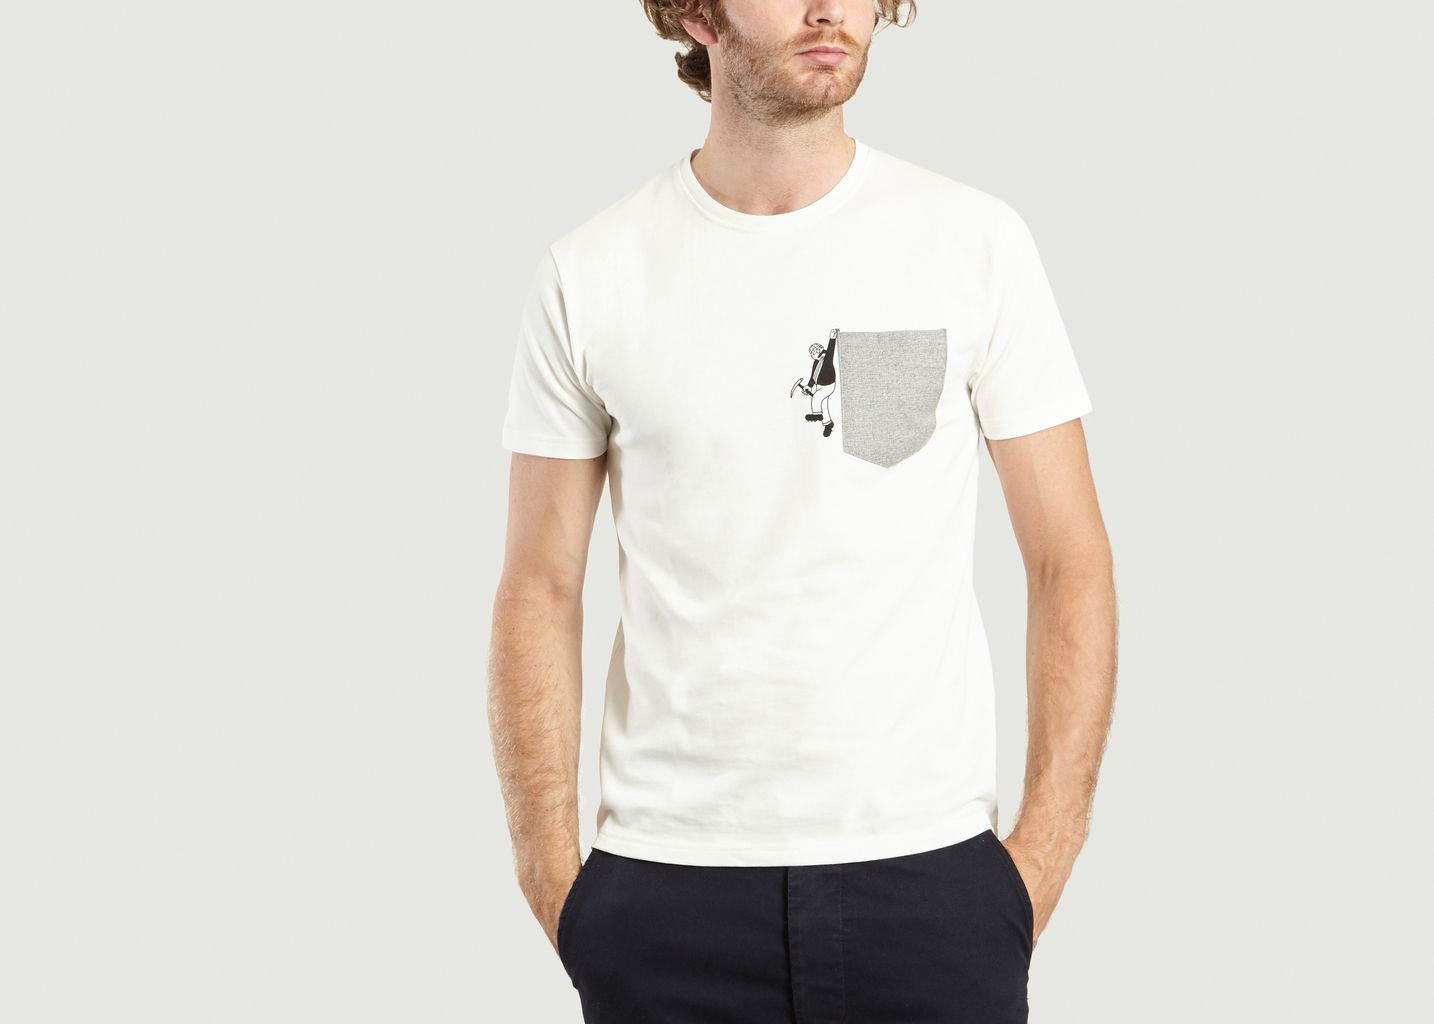 OLOW Mountainer T Shirt